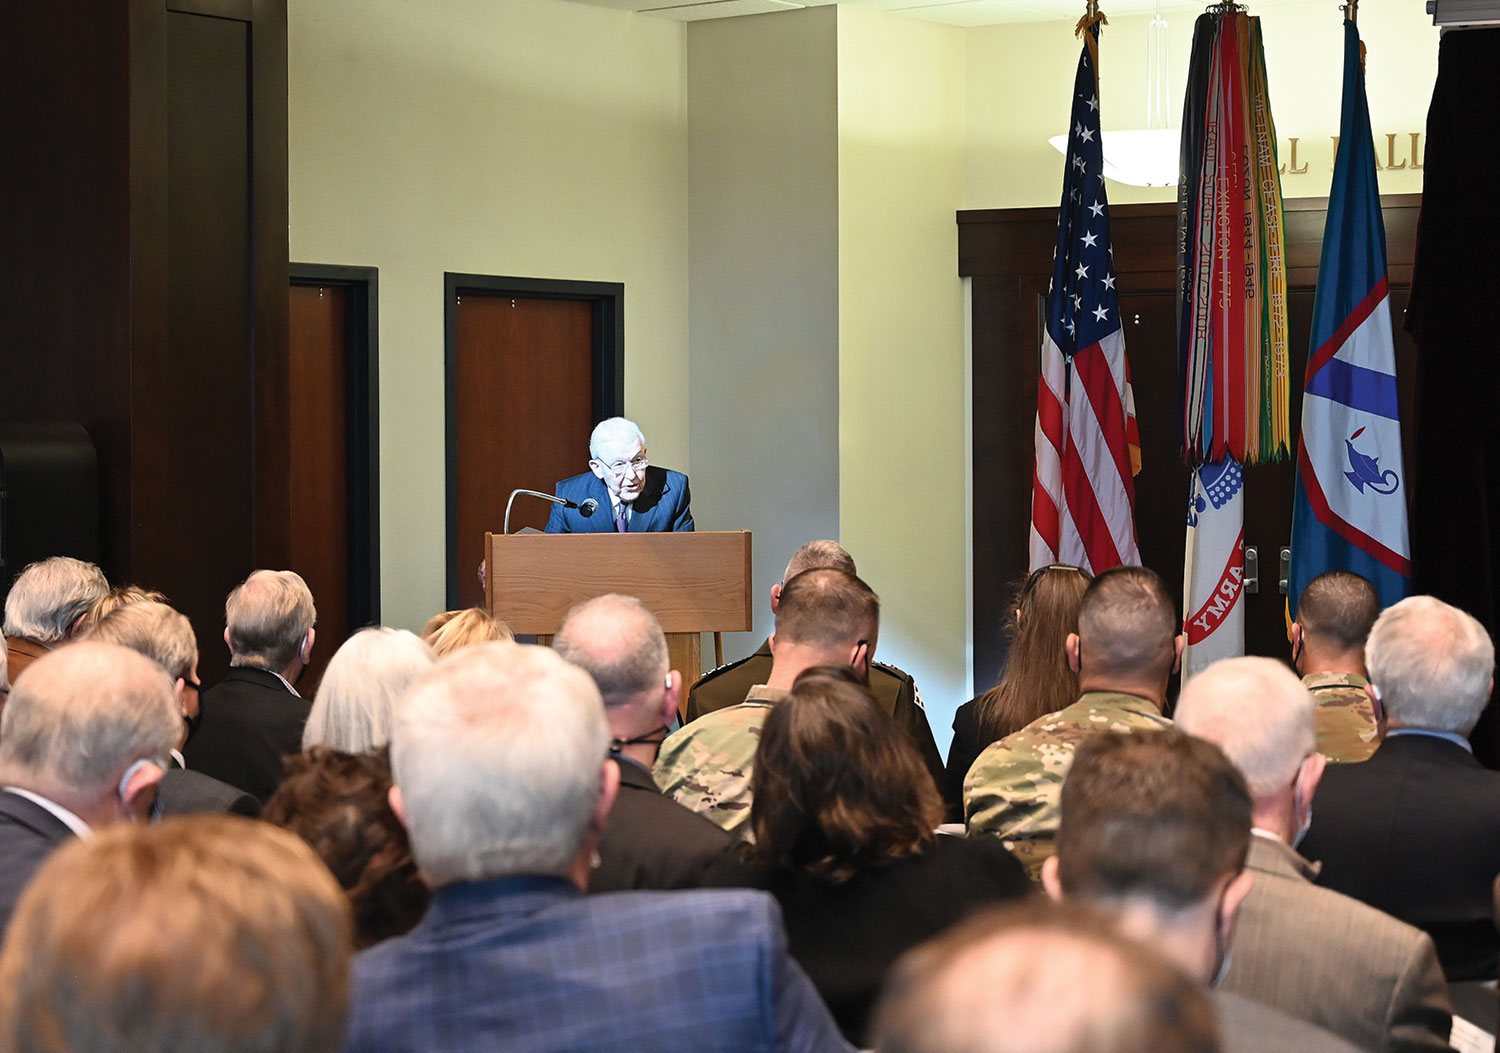 Lt. Gen. (Ret.) Robert Arter delivers remarks during the dedication ceremony for the Lewis and Clark Center atrium on Nov. 17, 2021. The atrium was dedicated as “The Arter Atrium” in honor of Arter and his wife Lois, for their contributions to the nation, the Army, Fort Leavenworth and the community.